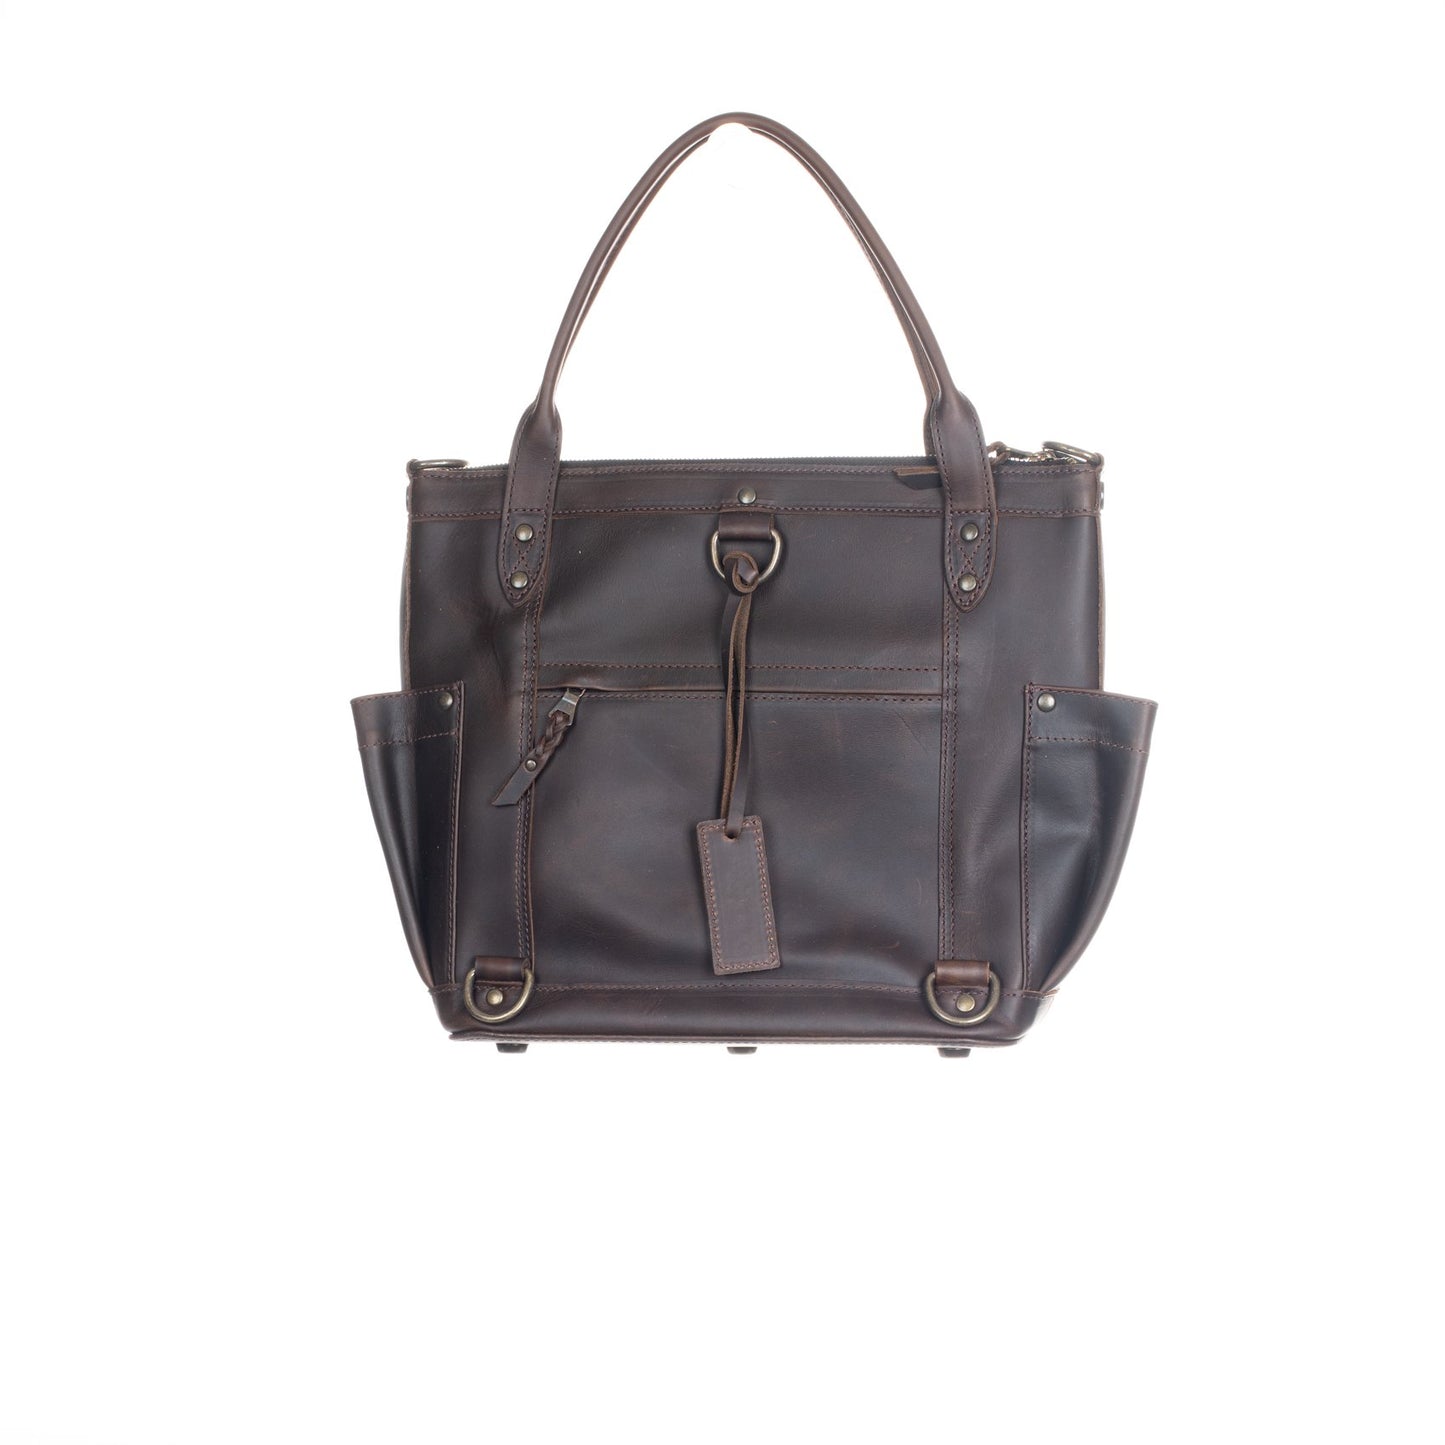 THE PERFECT BAG MEDIUM - MEXICO COLLECTION - HANDWOVEN FRONT NO. 93160 - PAINTHORSE TUMBLED LEATHER